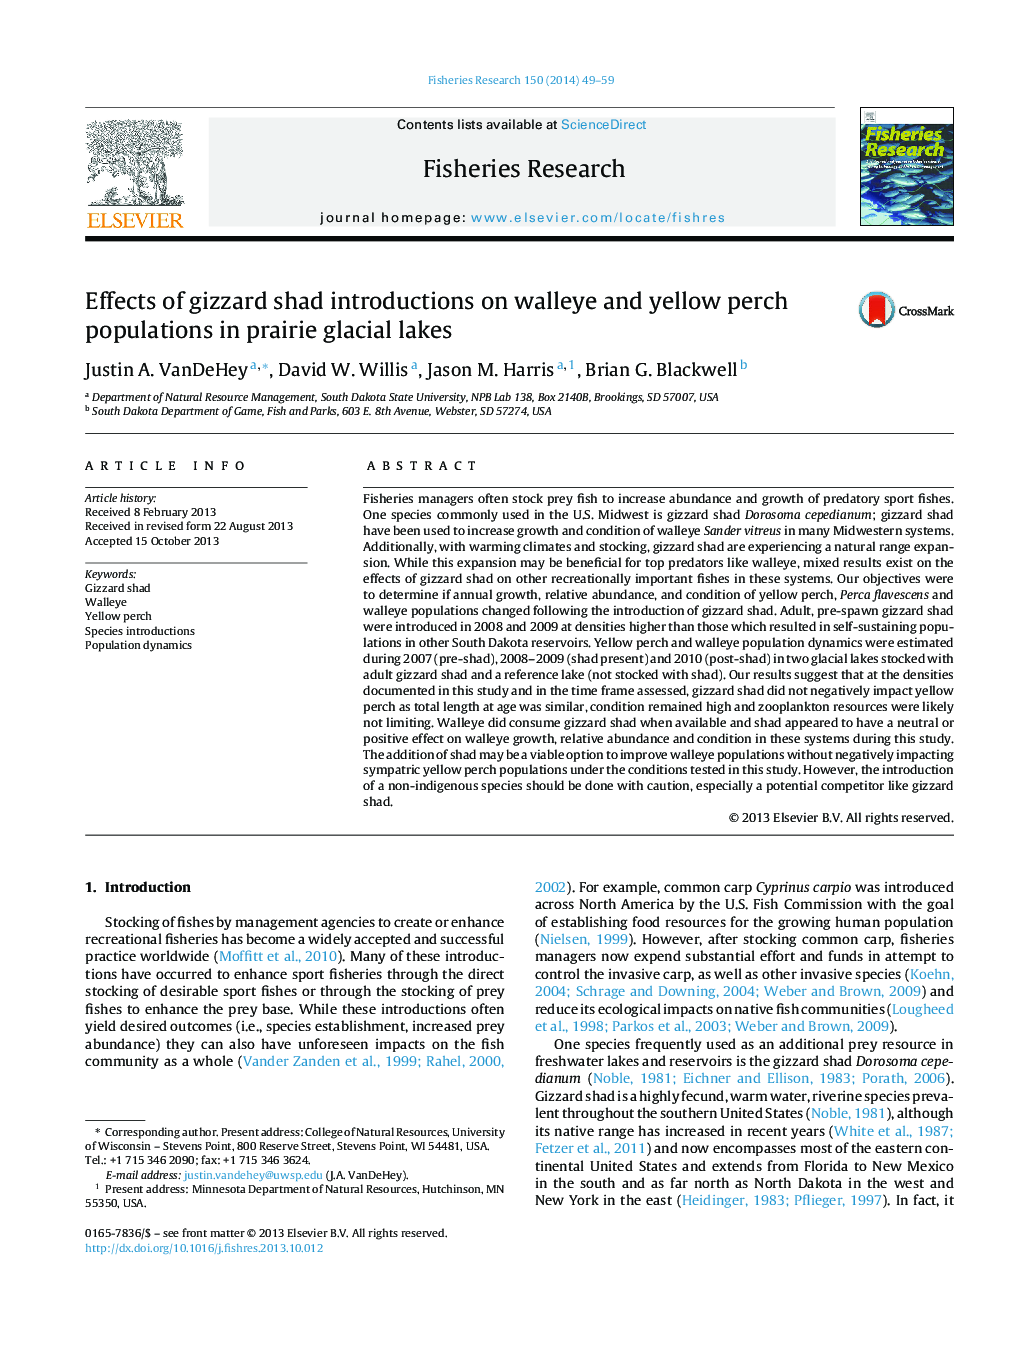 Effects of gizzard shad introductions on walleye and yellow perch populations in prairie glacial lakes